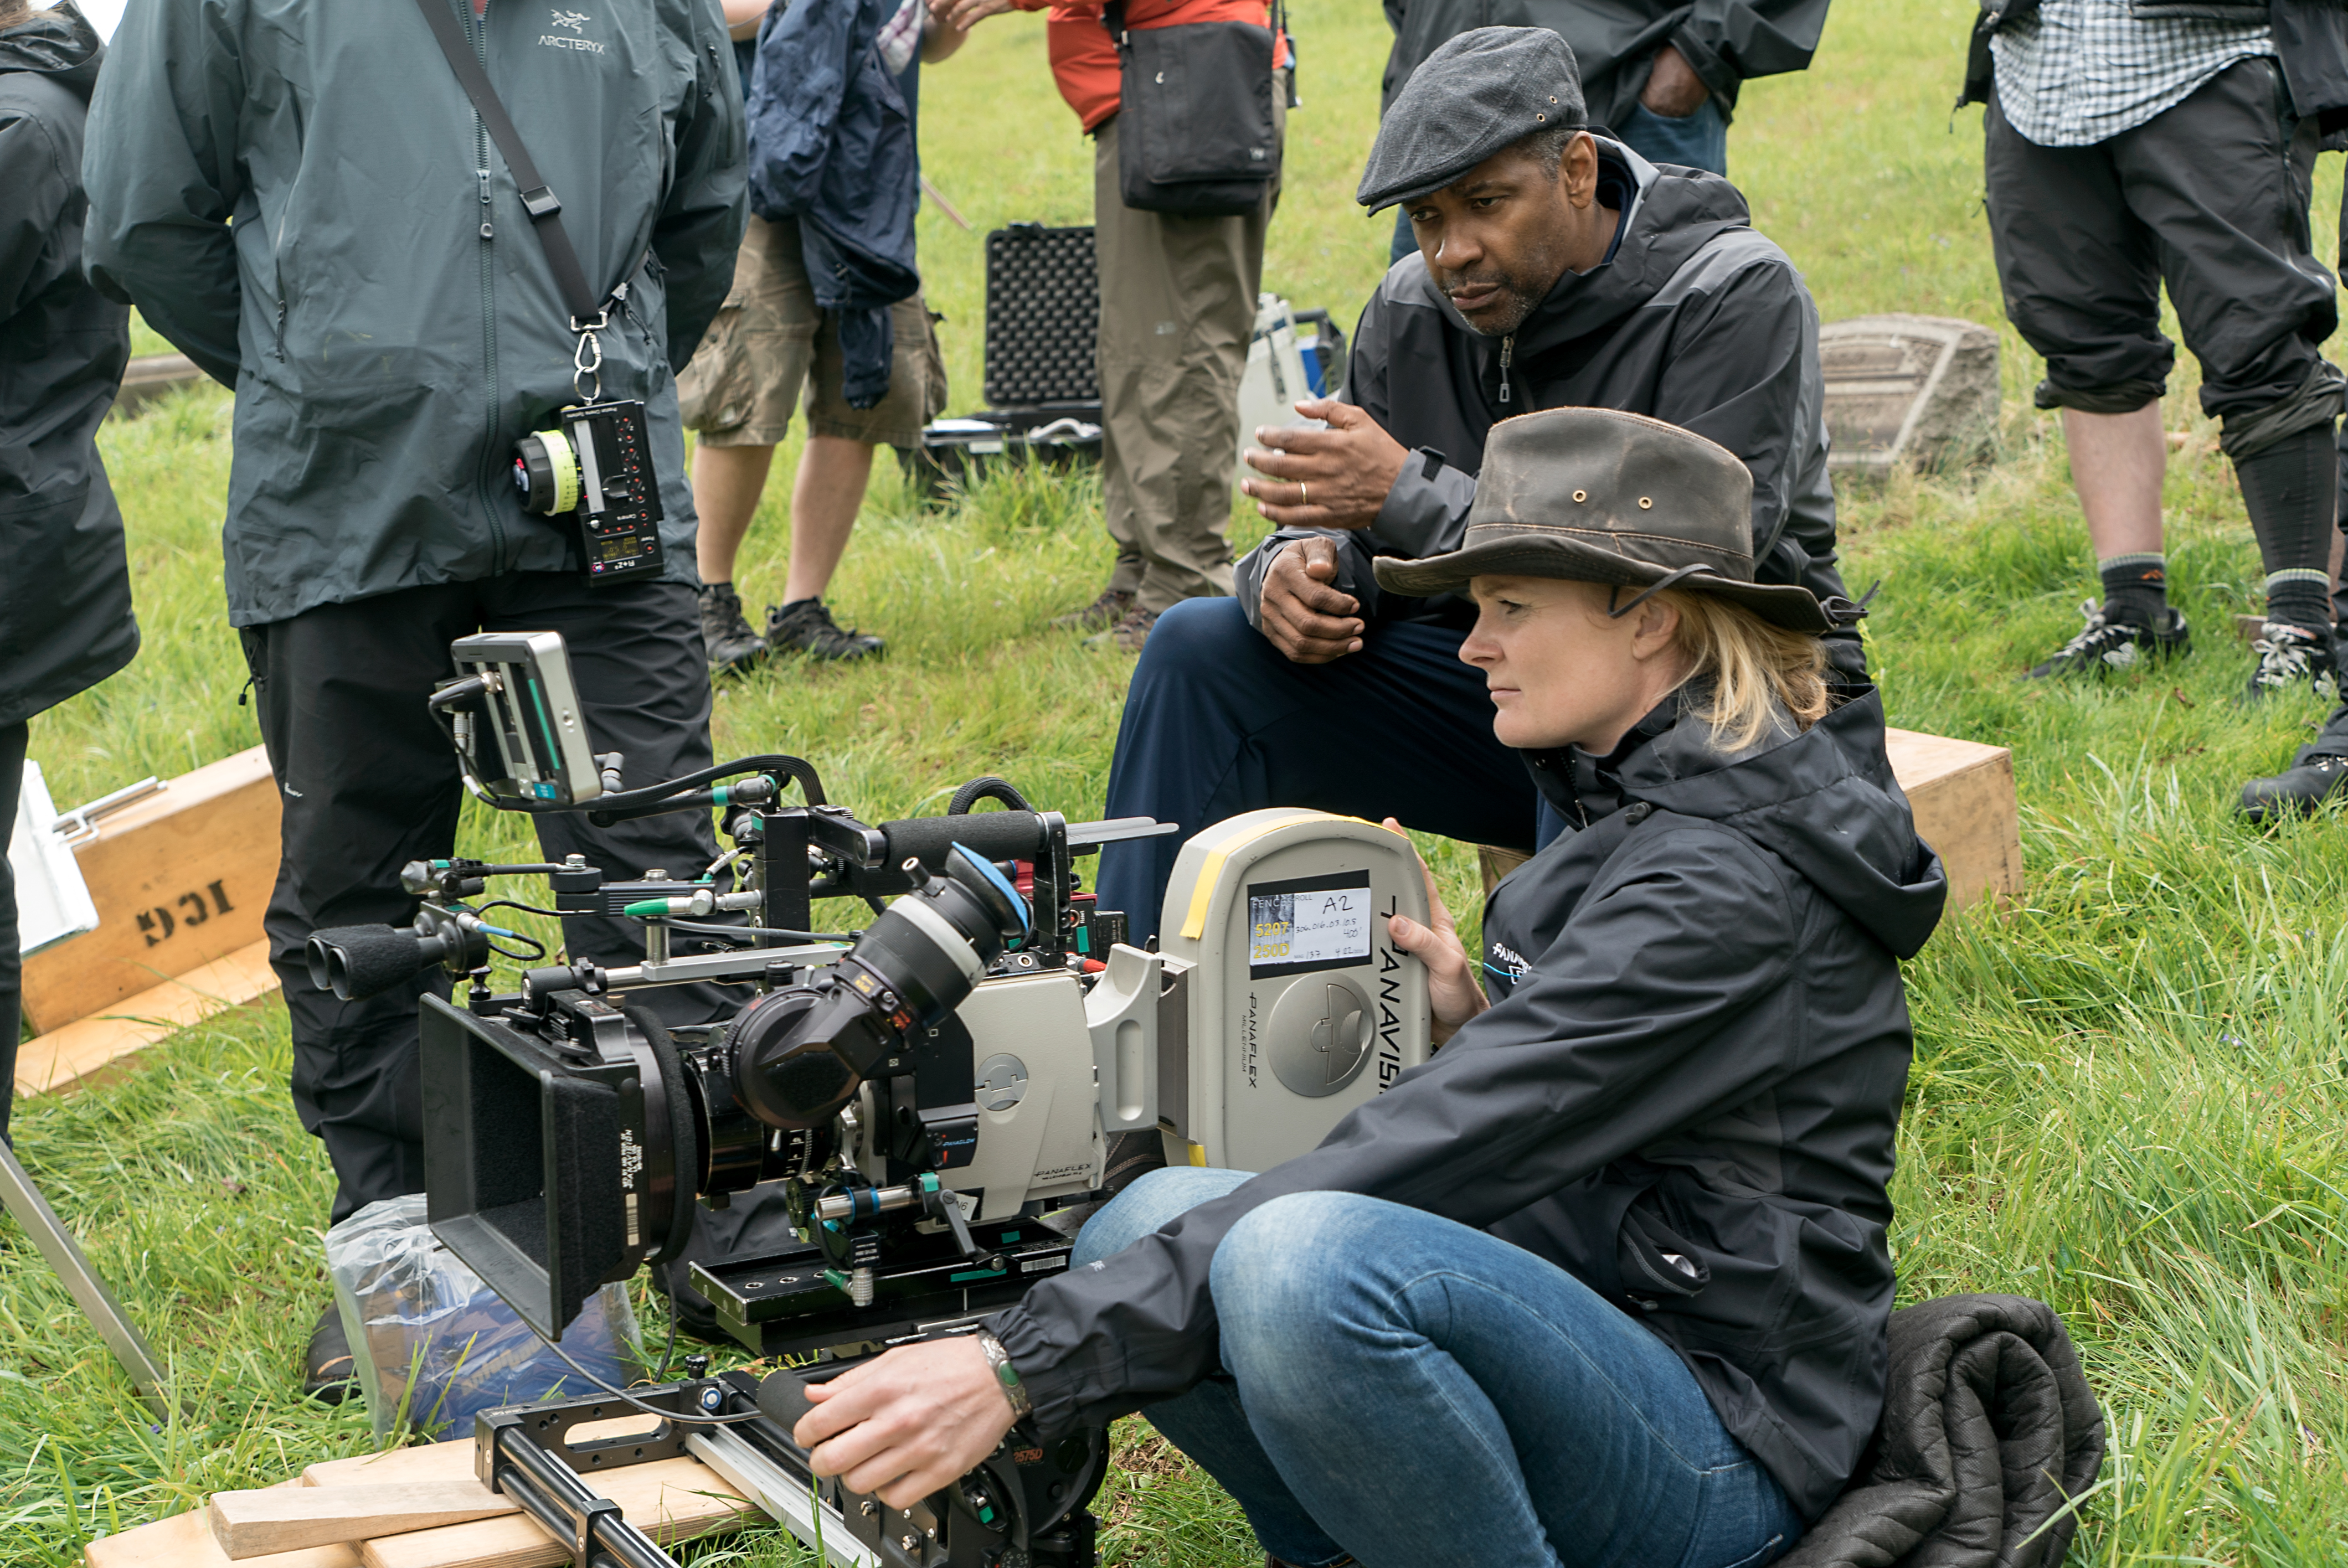 Director of Photography Charlotte Bruus Christensen and Director Denzel Washington on the set of Fences from Paramount Pictures. Directed by Denzel Washington from a screenplay by August Wilson.